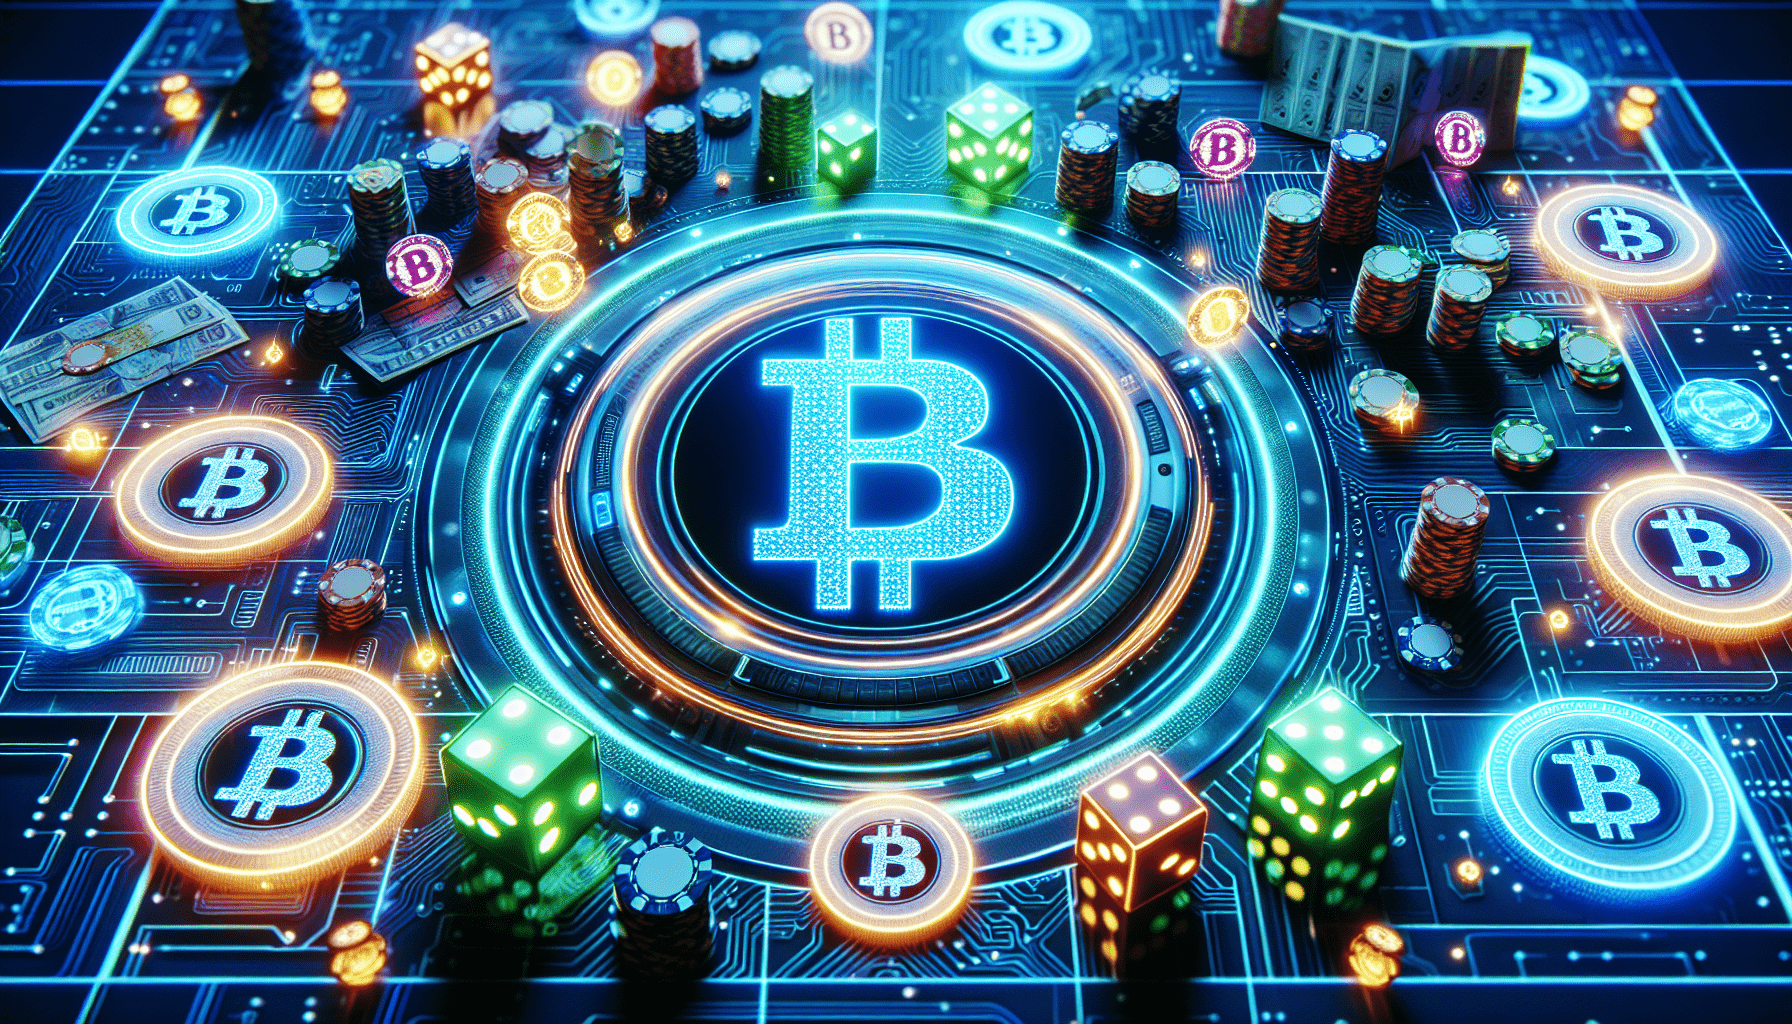 Can I Gamble Online With Bitcoin?